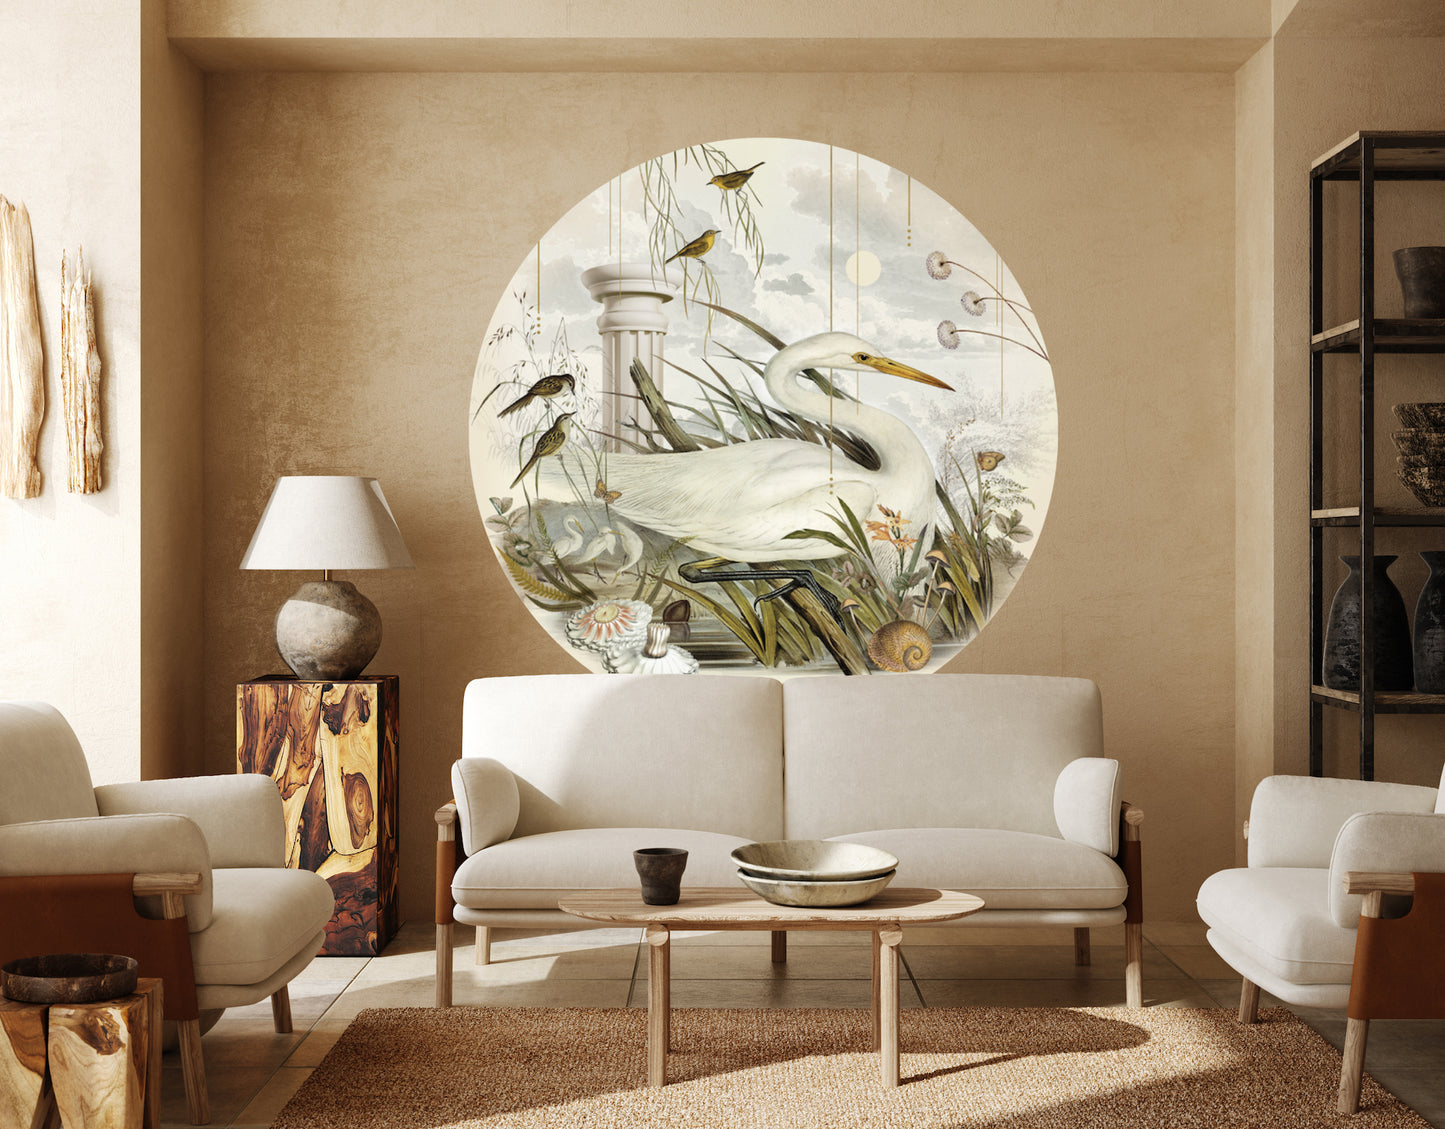 "Morning Bliss" Self-adhesive wallpaper, round vintage bird wall decal.